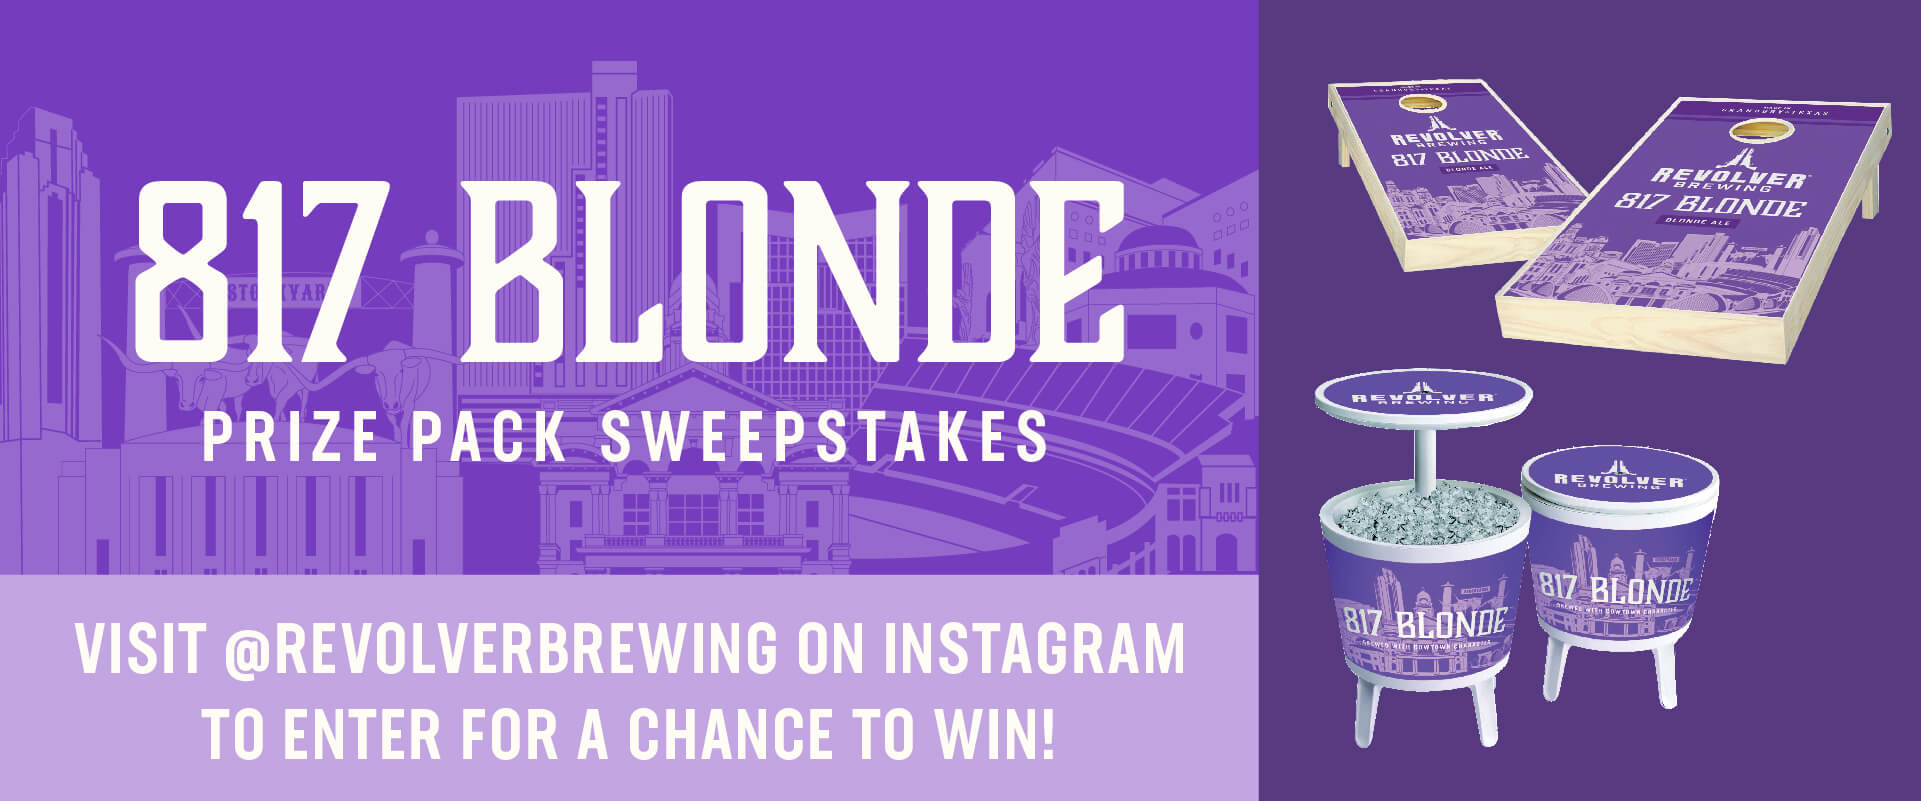 817 Blonde Prize pack sweepstakes